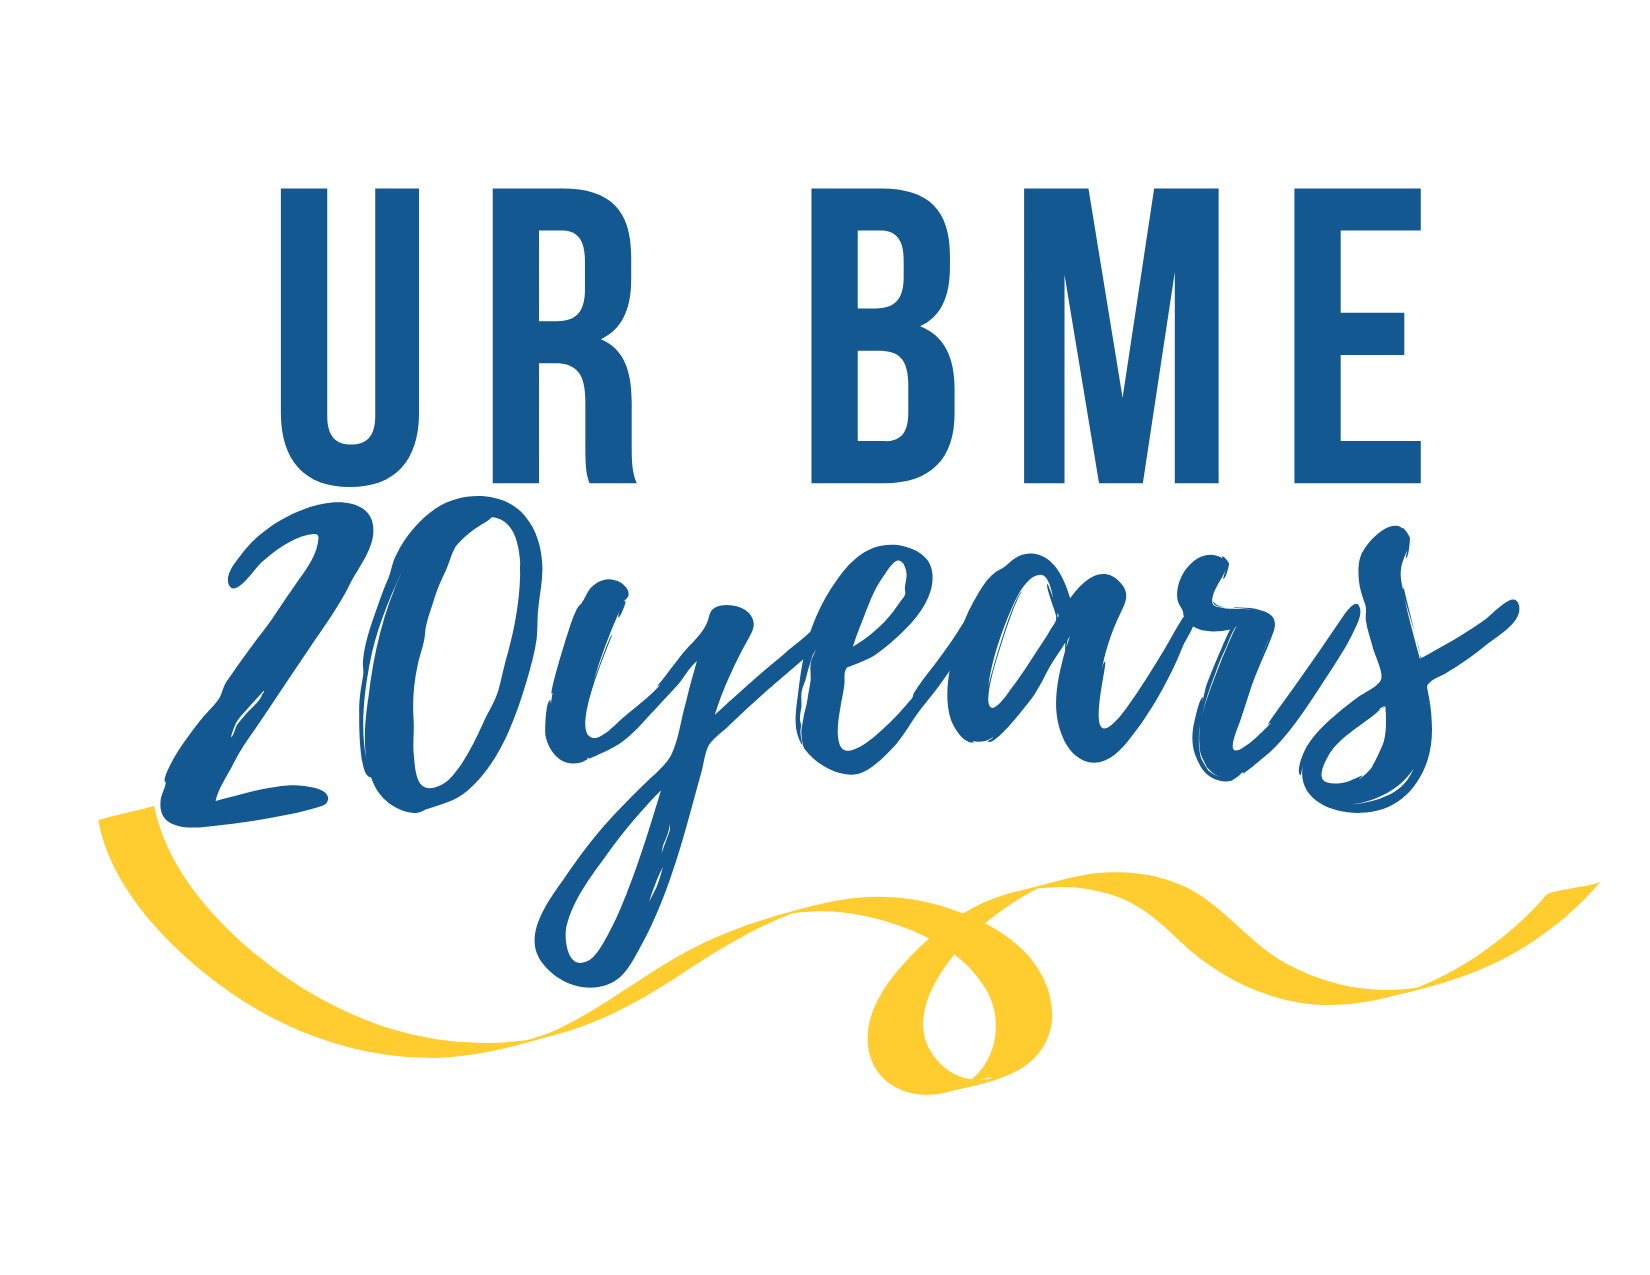 A logo for the 20th anniversary of BME.